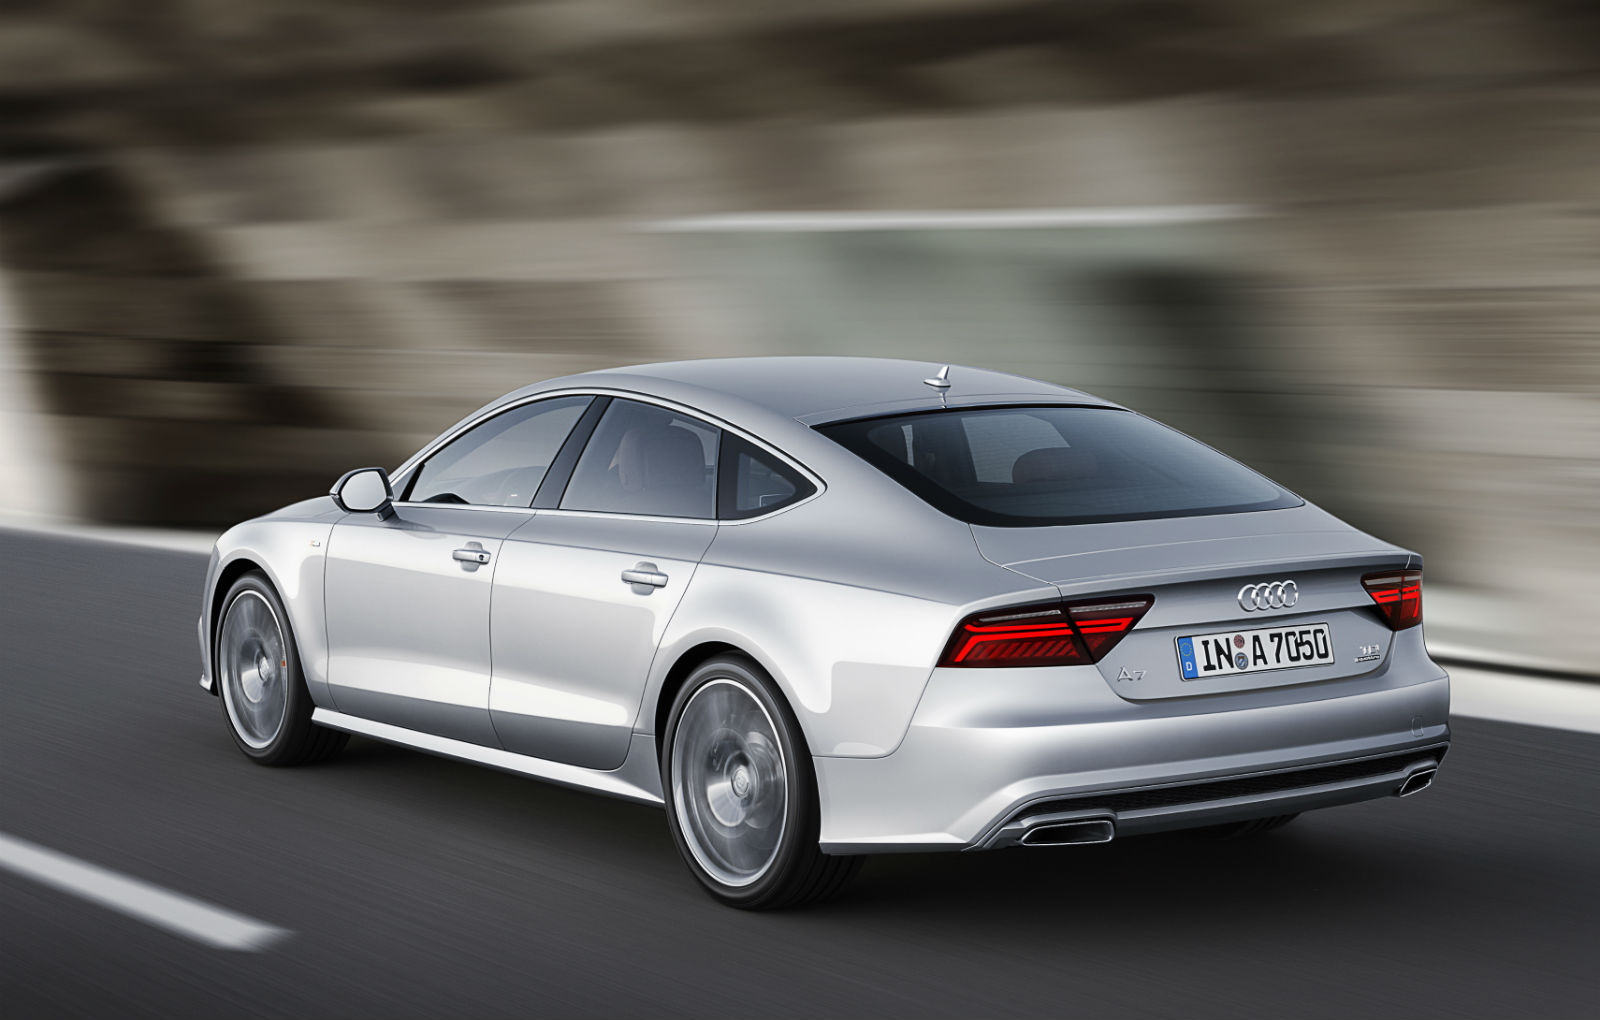 2014 Audi A7 Sportback Revealed with Facelift and Power ...